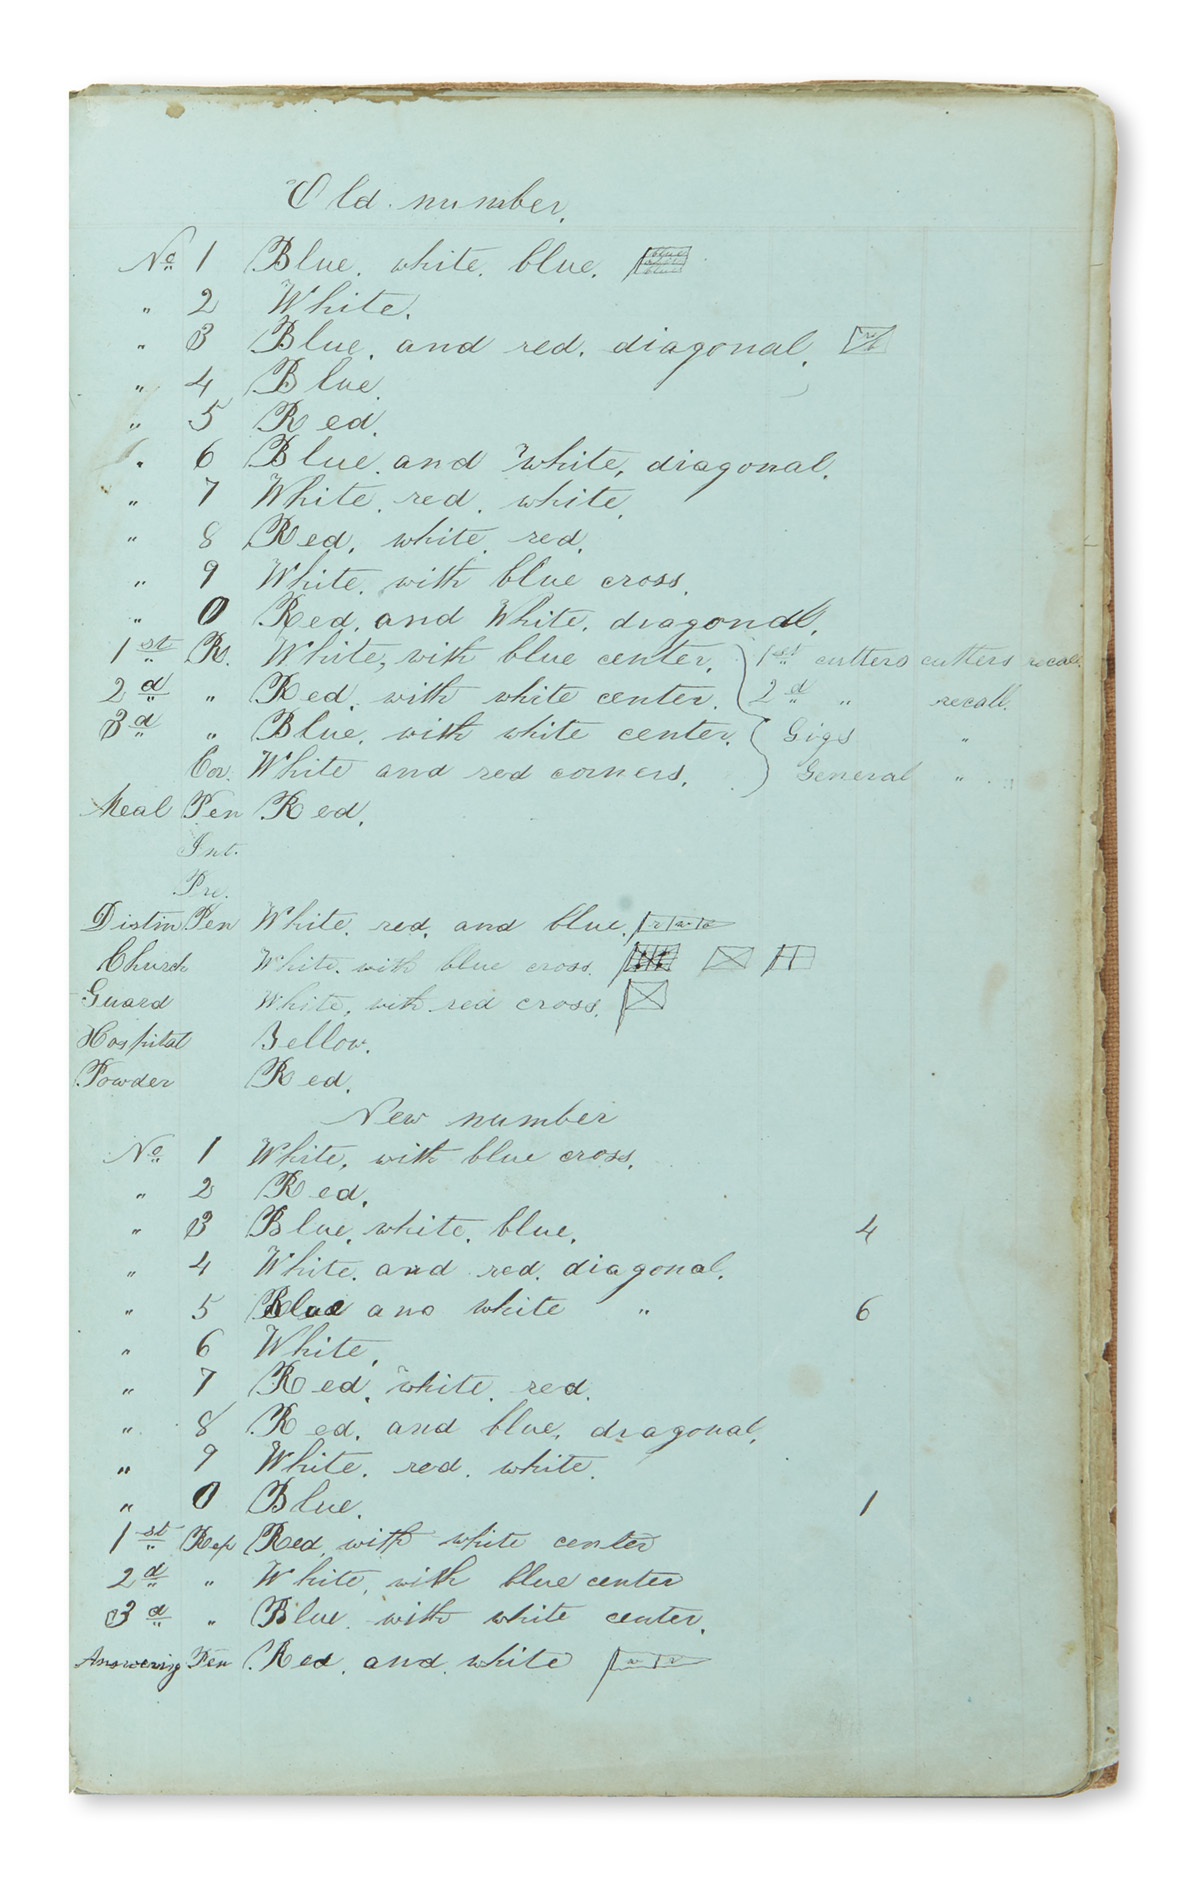 (CIVIL WAR--NAVY.) Walker, Samuel. Diary kept during the entire first cruise of the USS Kineo, a gunboat on the Mississippi.